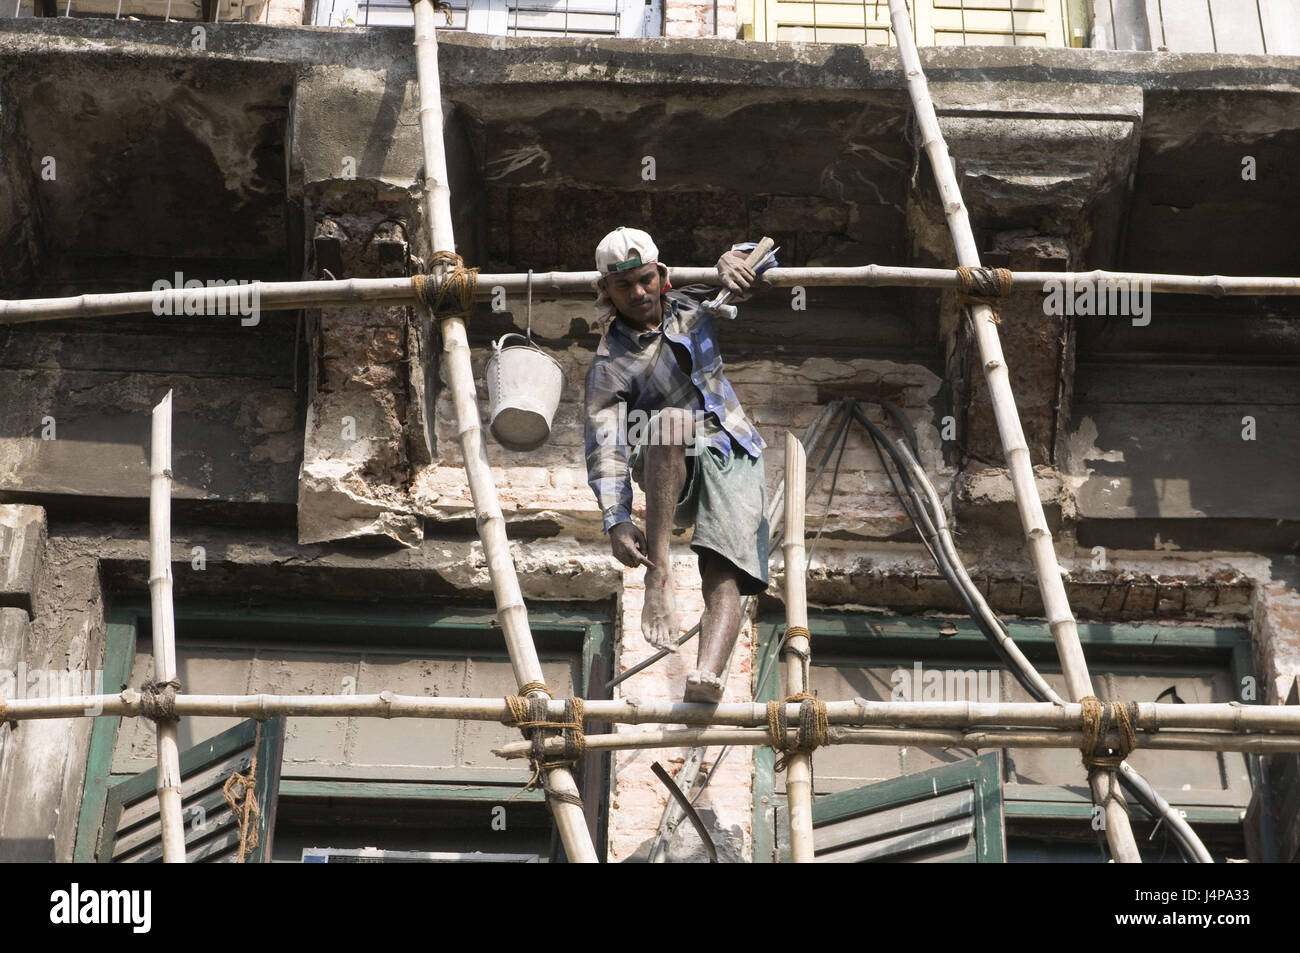 Residential house, scaffold, bamboo, dangerously, worker, balance, Calcutta, India, no model release, Stock Photo